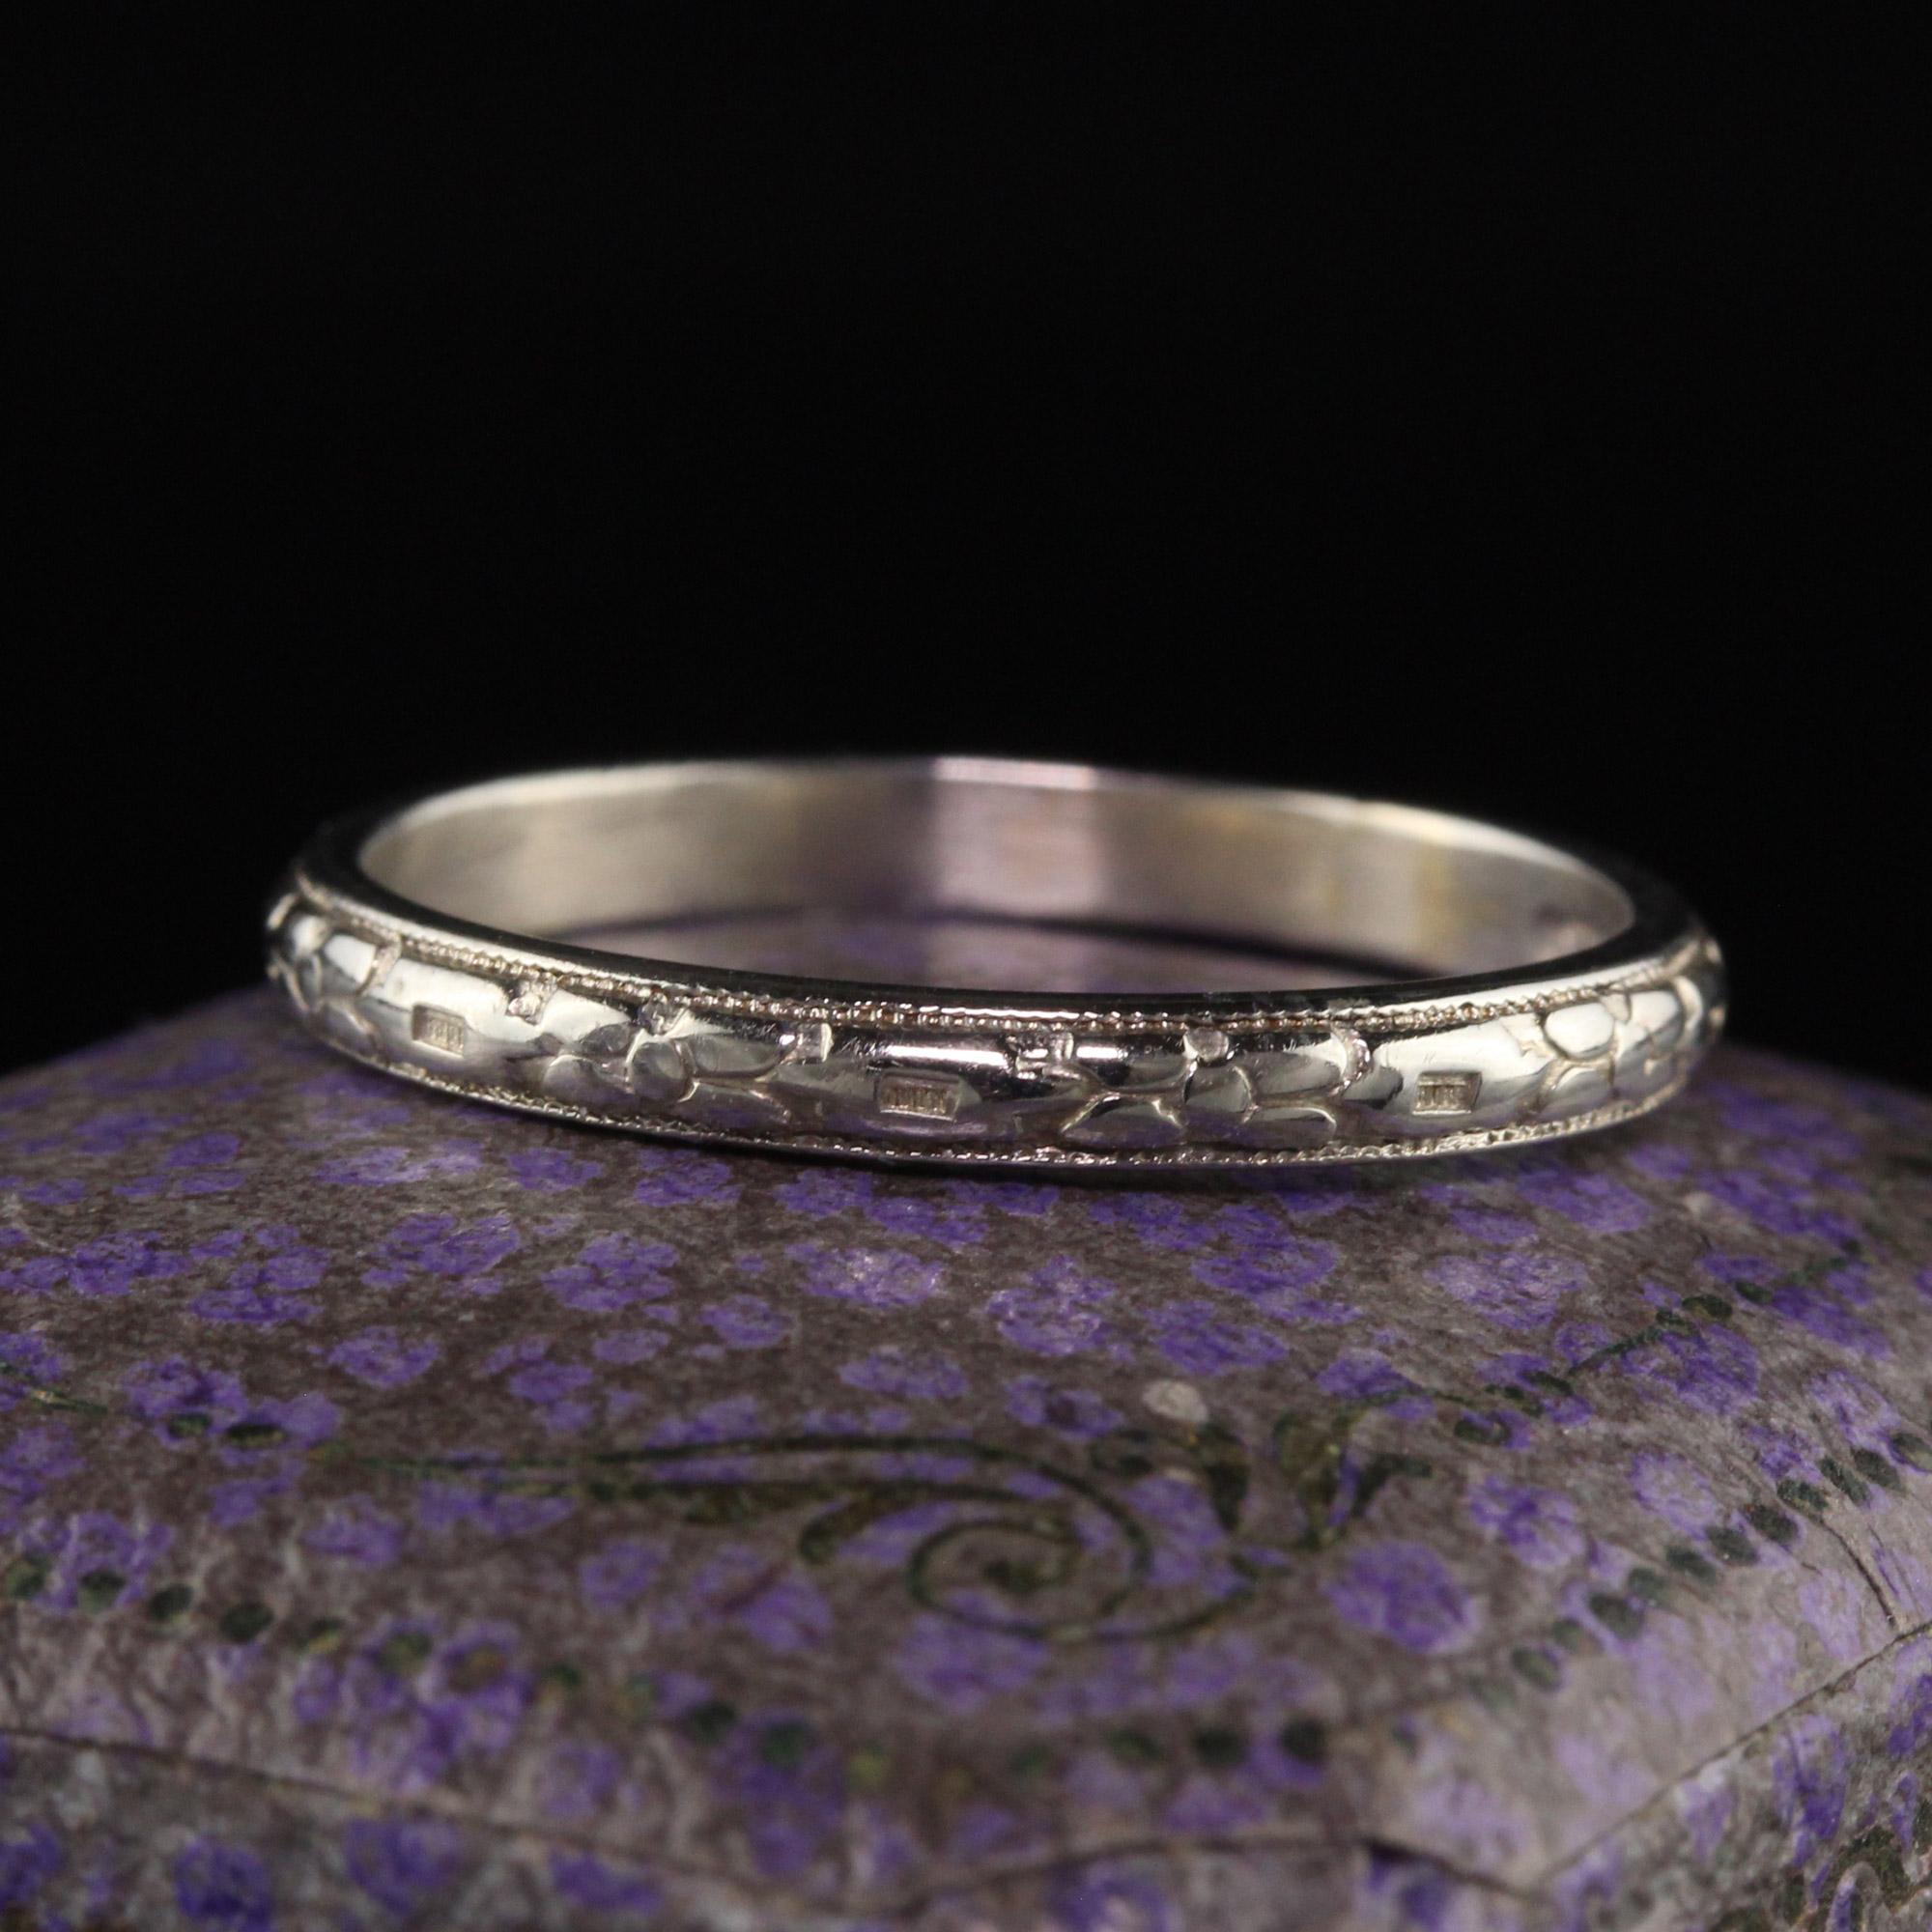 Beautiful Antique Art Deco 18K White Gold Engraved Wedding Band - Size 7 3/4. This beautiful band is crafted in 18k white gold. The band is engraved around most of the band and one part has been sized before and has a smooth spot from where it was